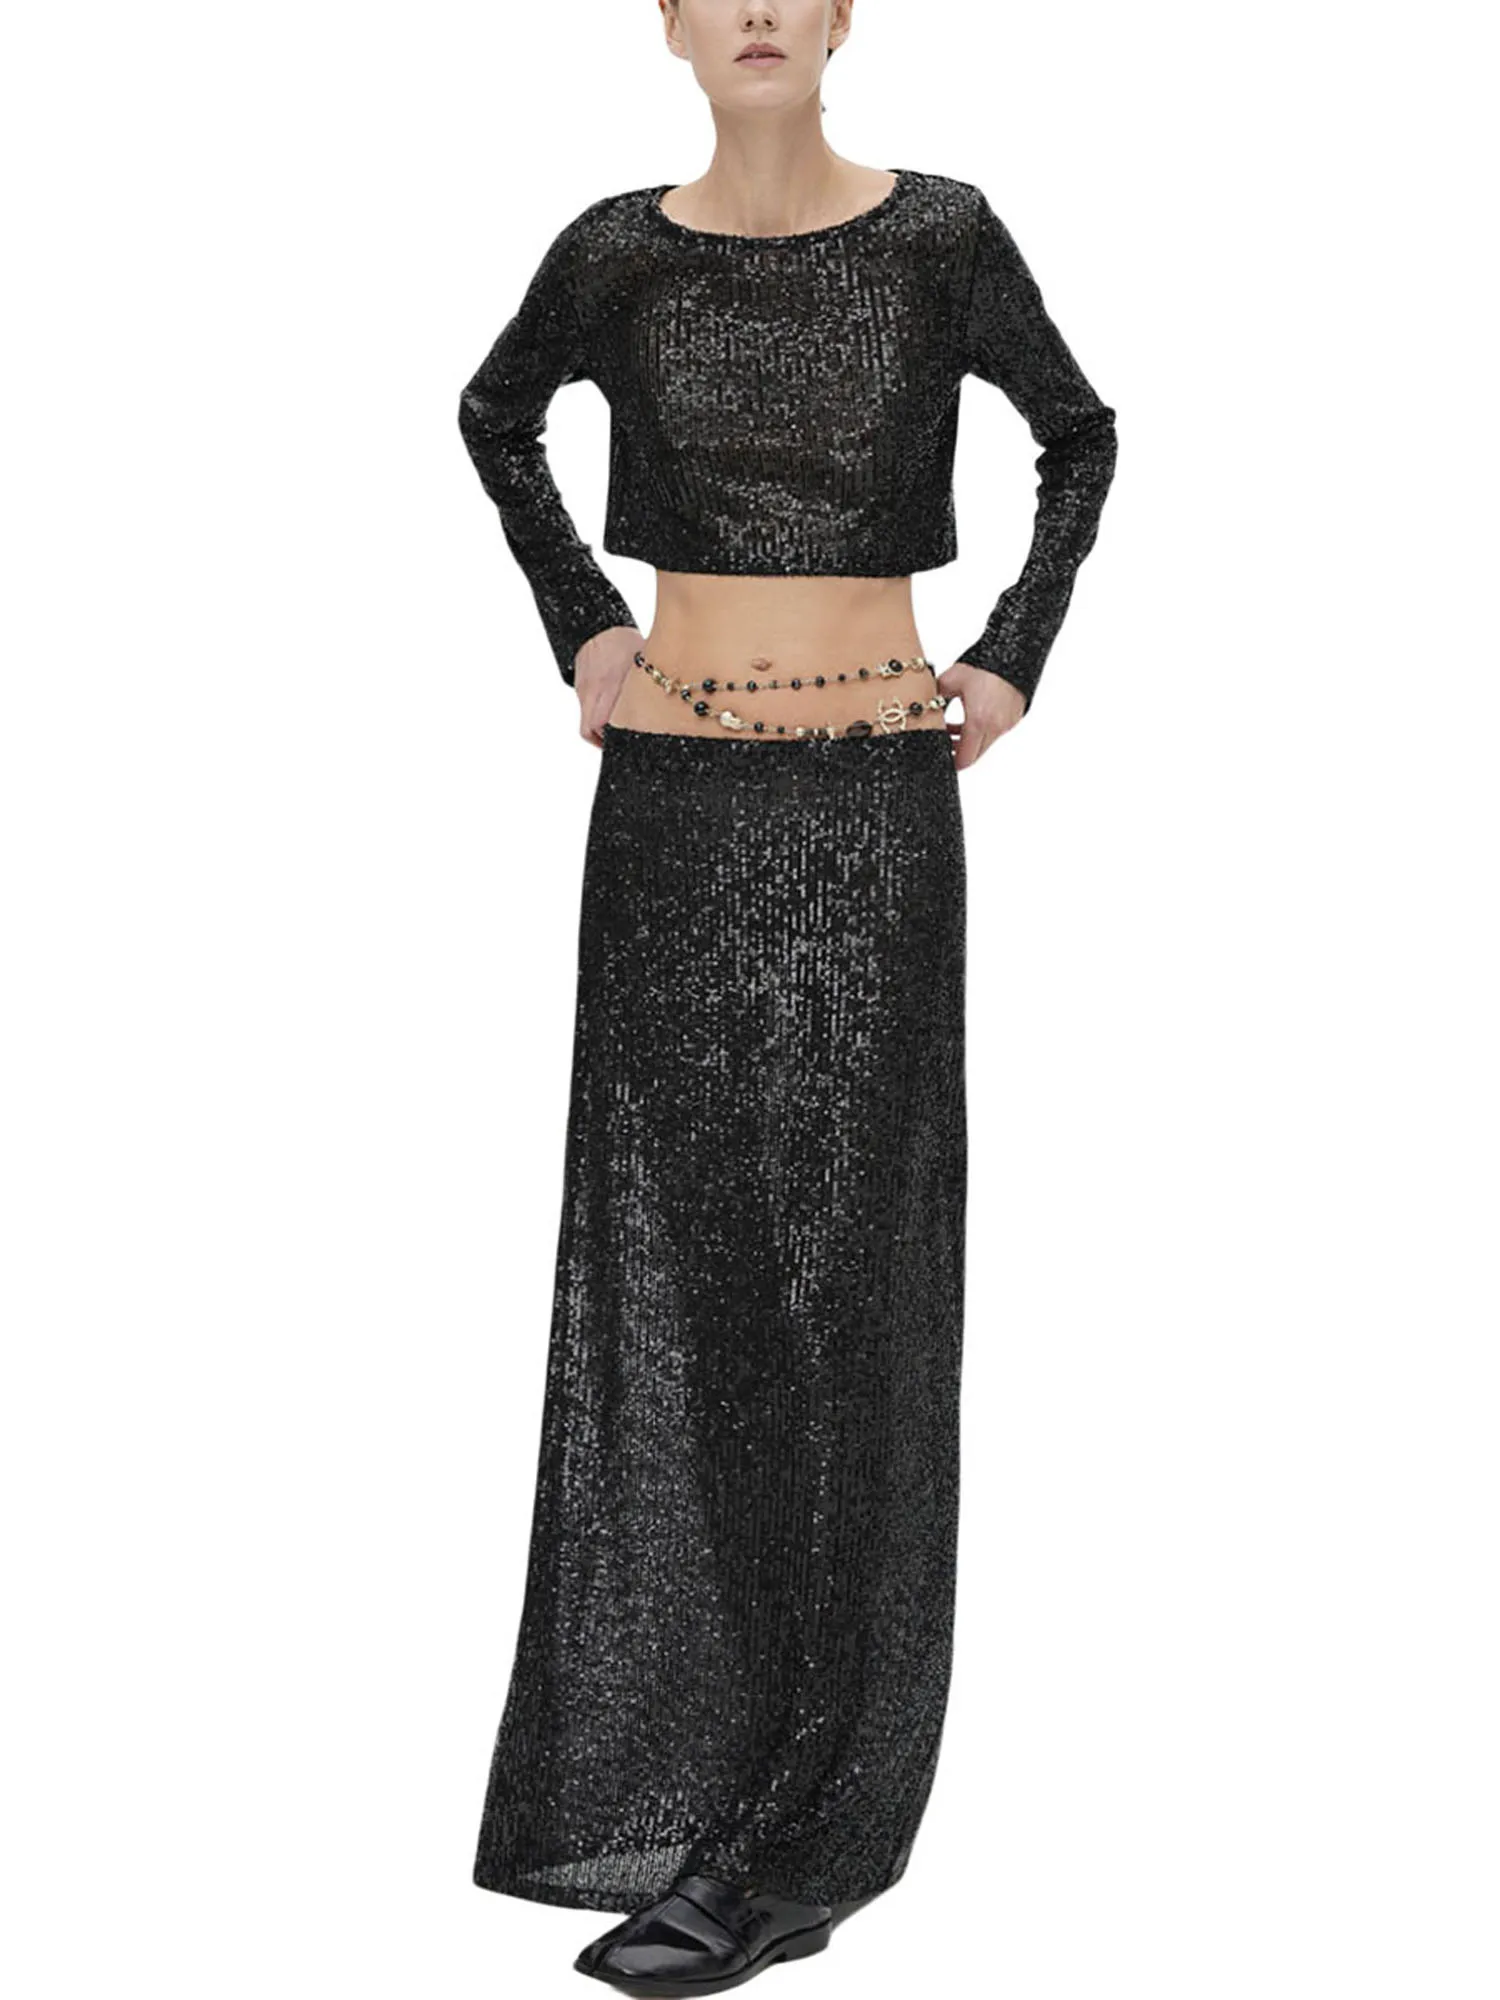 

Women s Sequin Embellished Crop Top with Long Sleeves and Round Neckline - Shimmering Glamorous Party Blouse Perfect to Flaunt